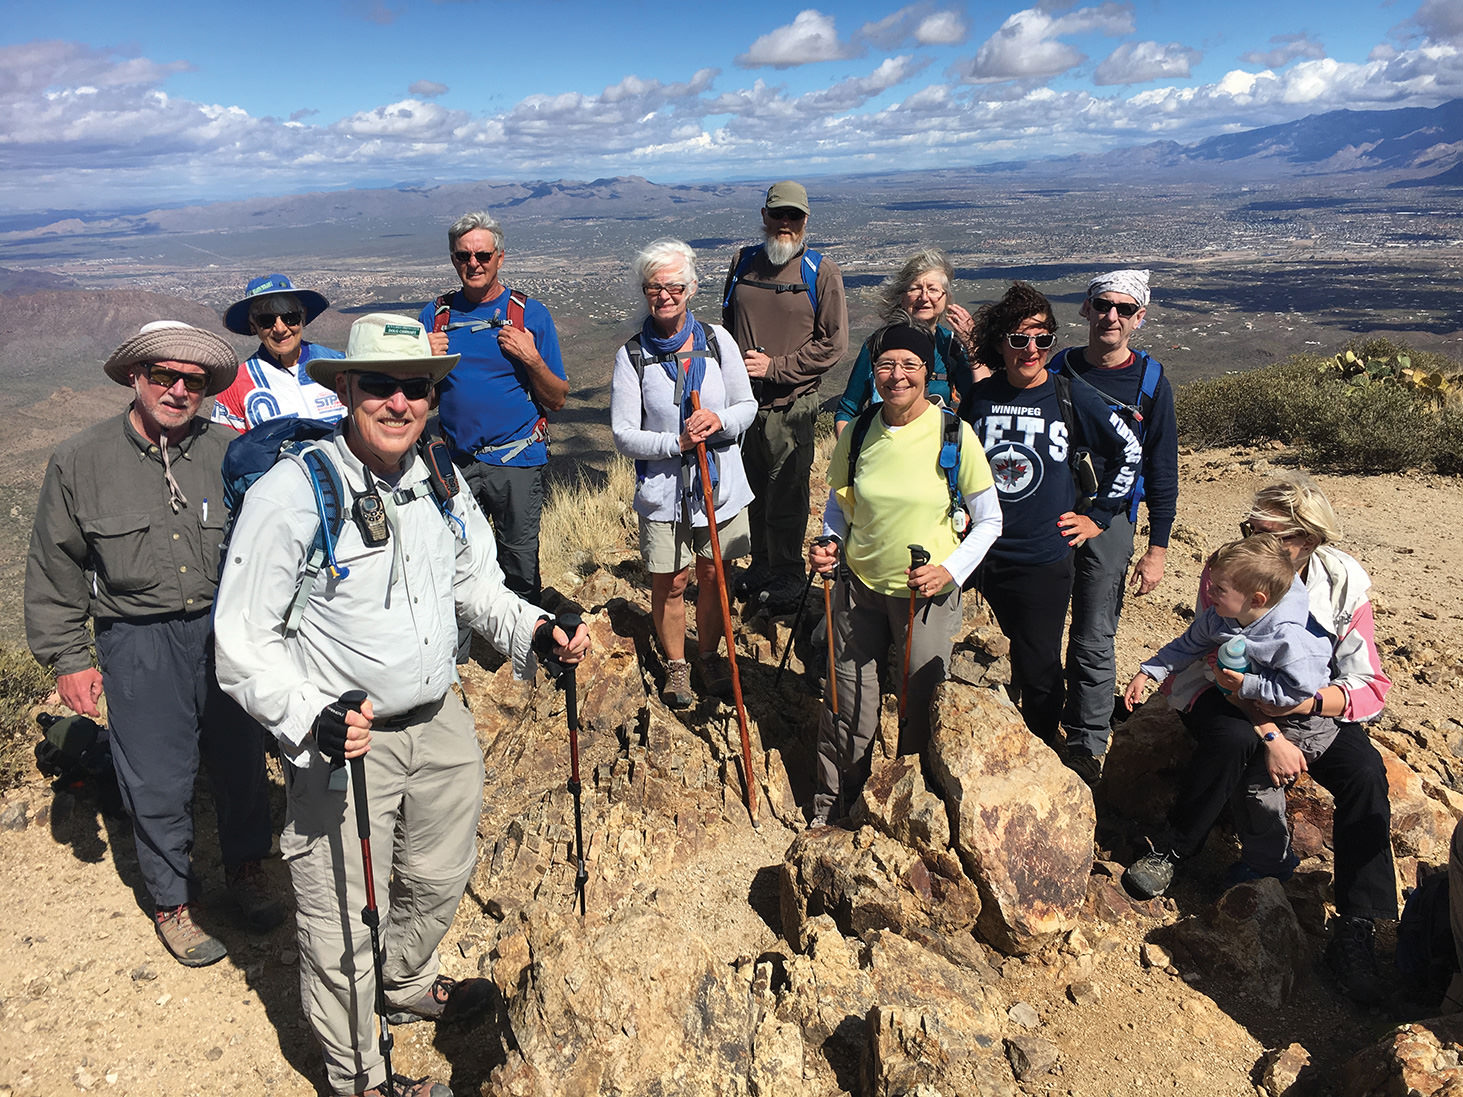 A flashback photo from our club at the top of Wasson Peak near Tucson